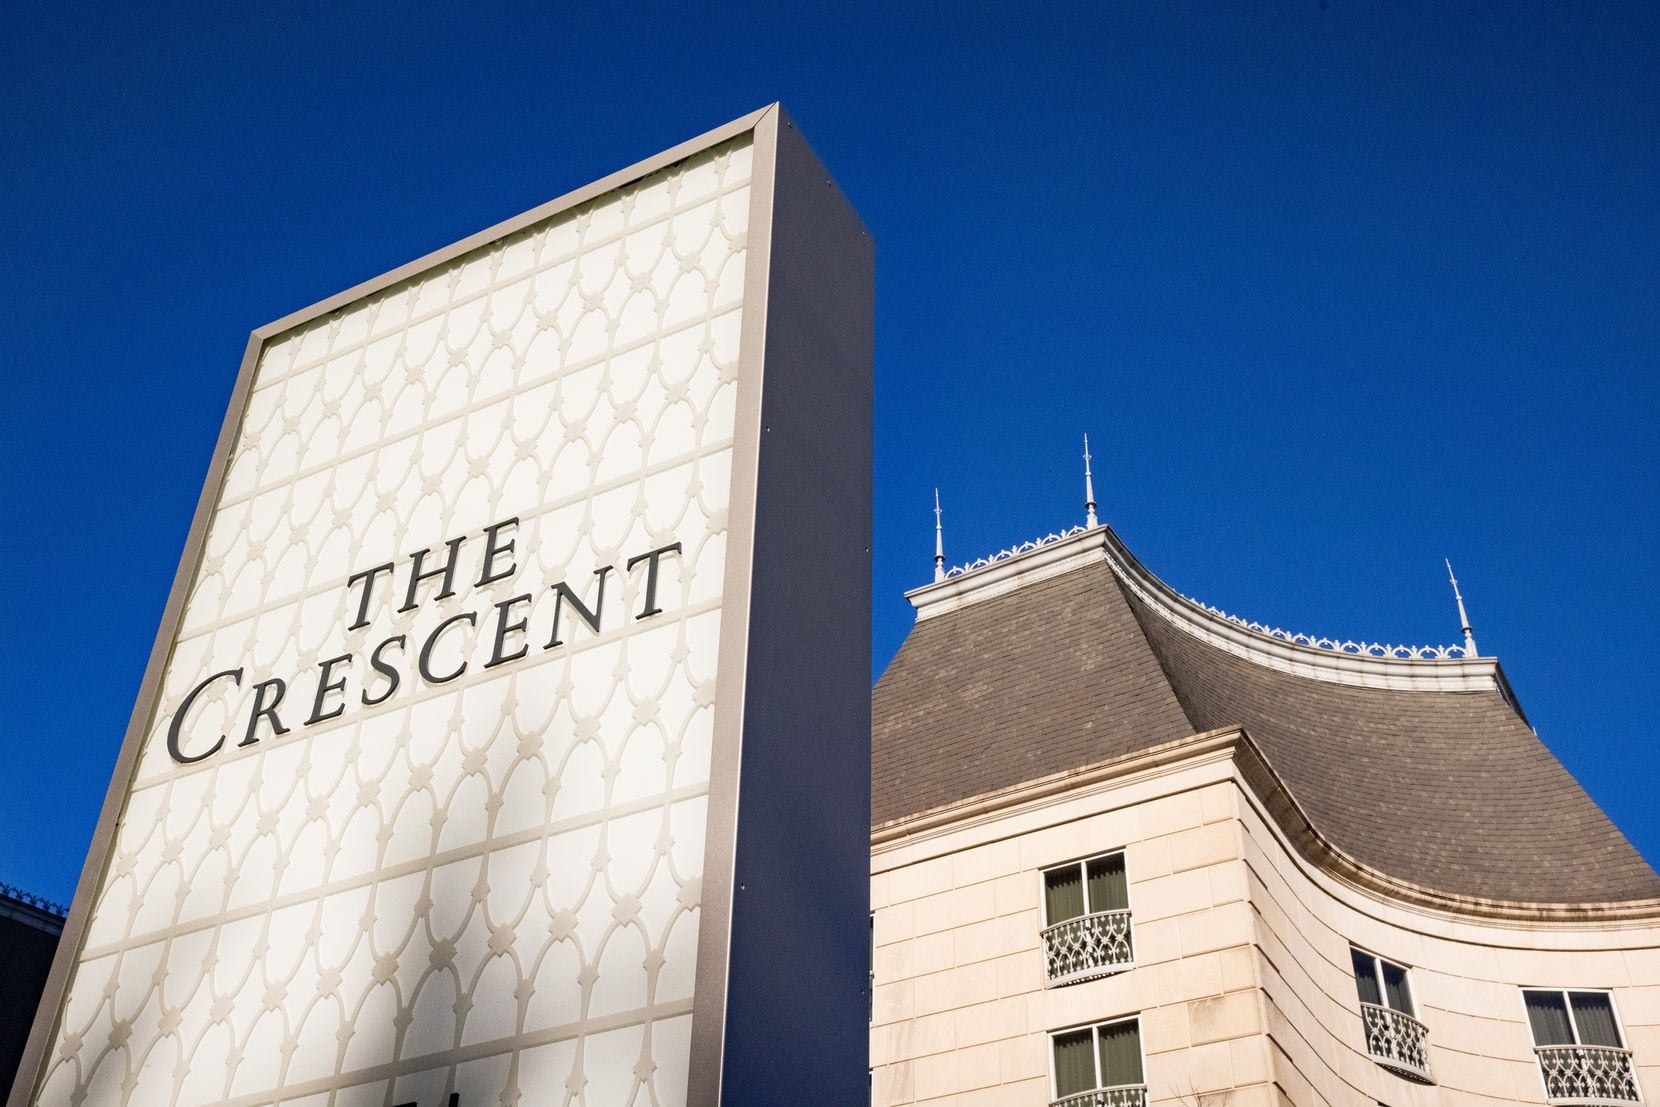 John Goff's Crescent Real Estate has owned its namesake Crescent office, hotel and retail project three times in the past 30 years. 